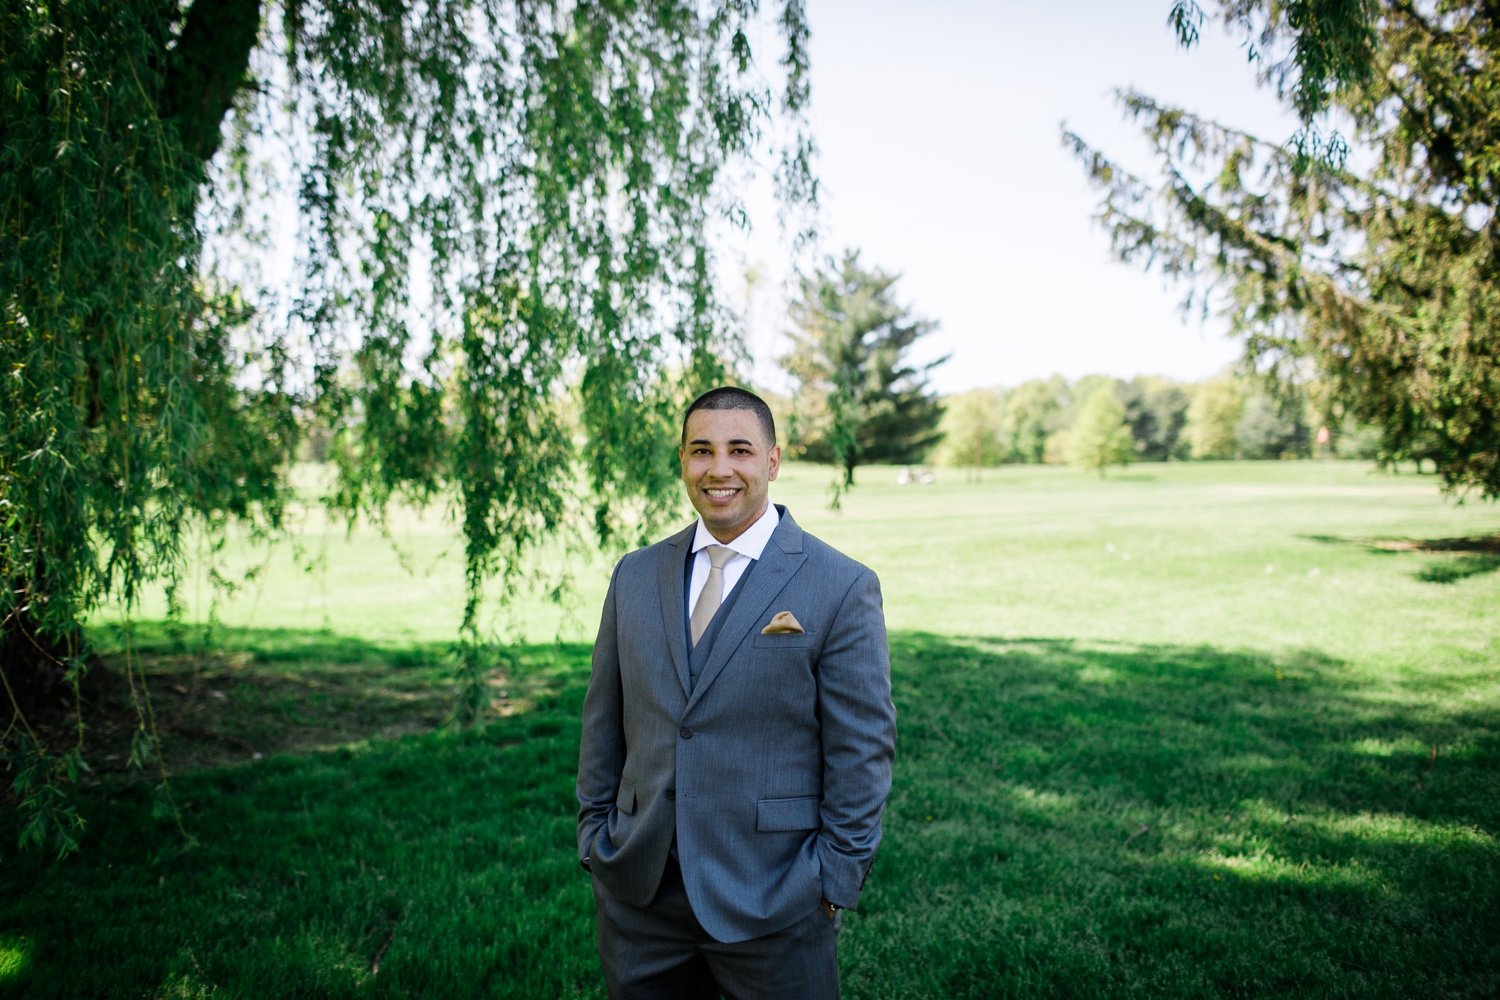 02_First look on a wedding day at Otterkill Golf and Country Club by Sweet Alice Photography.jpg